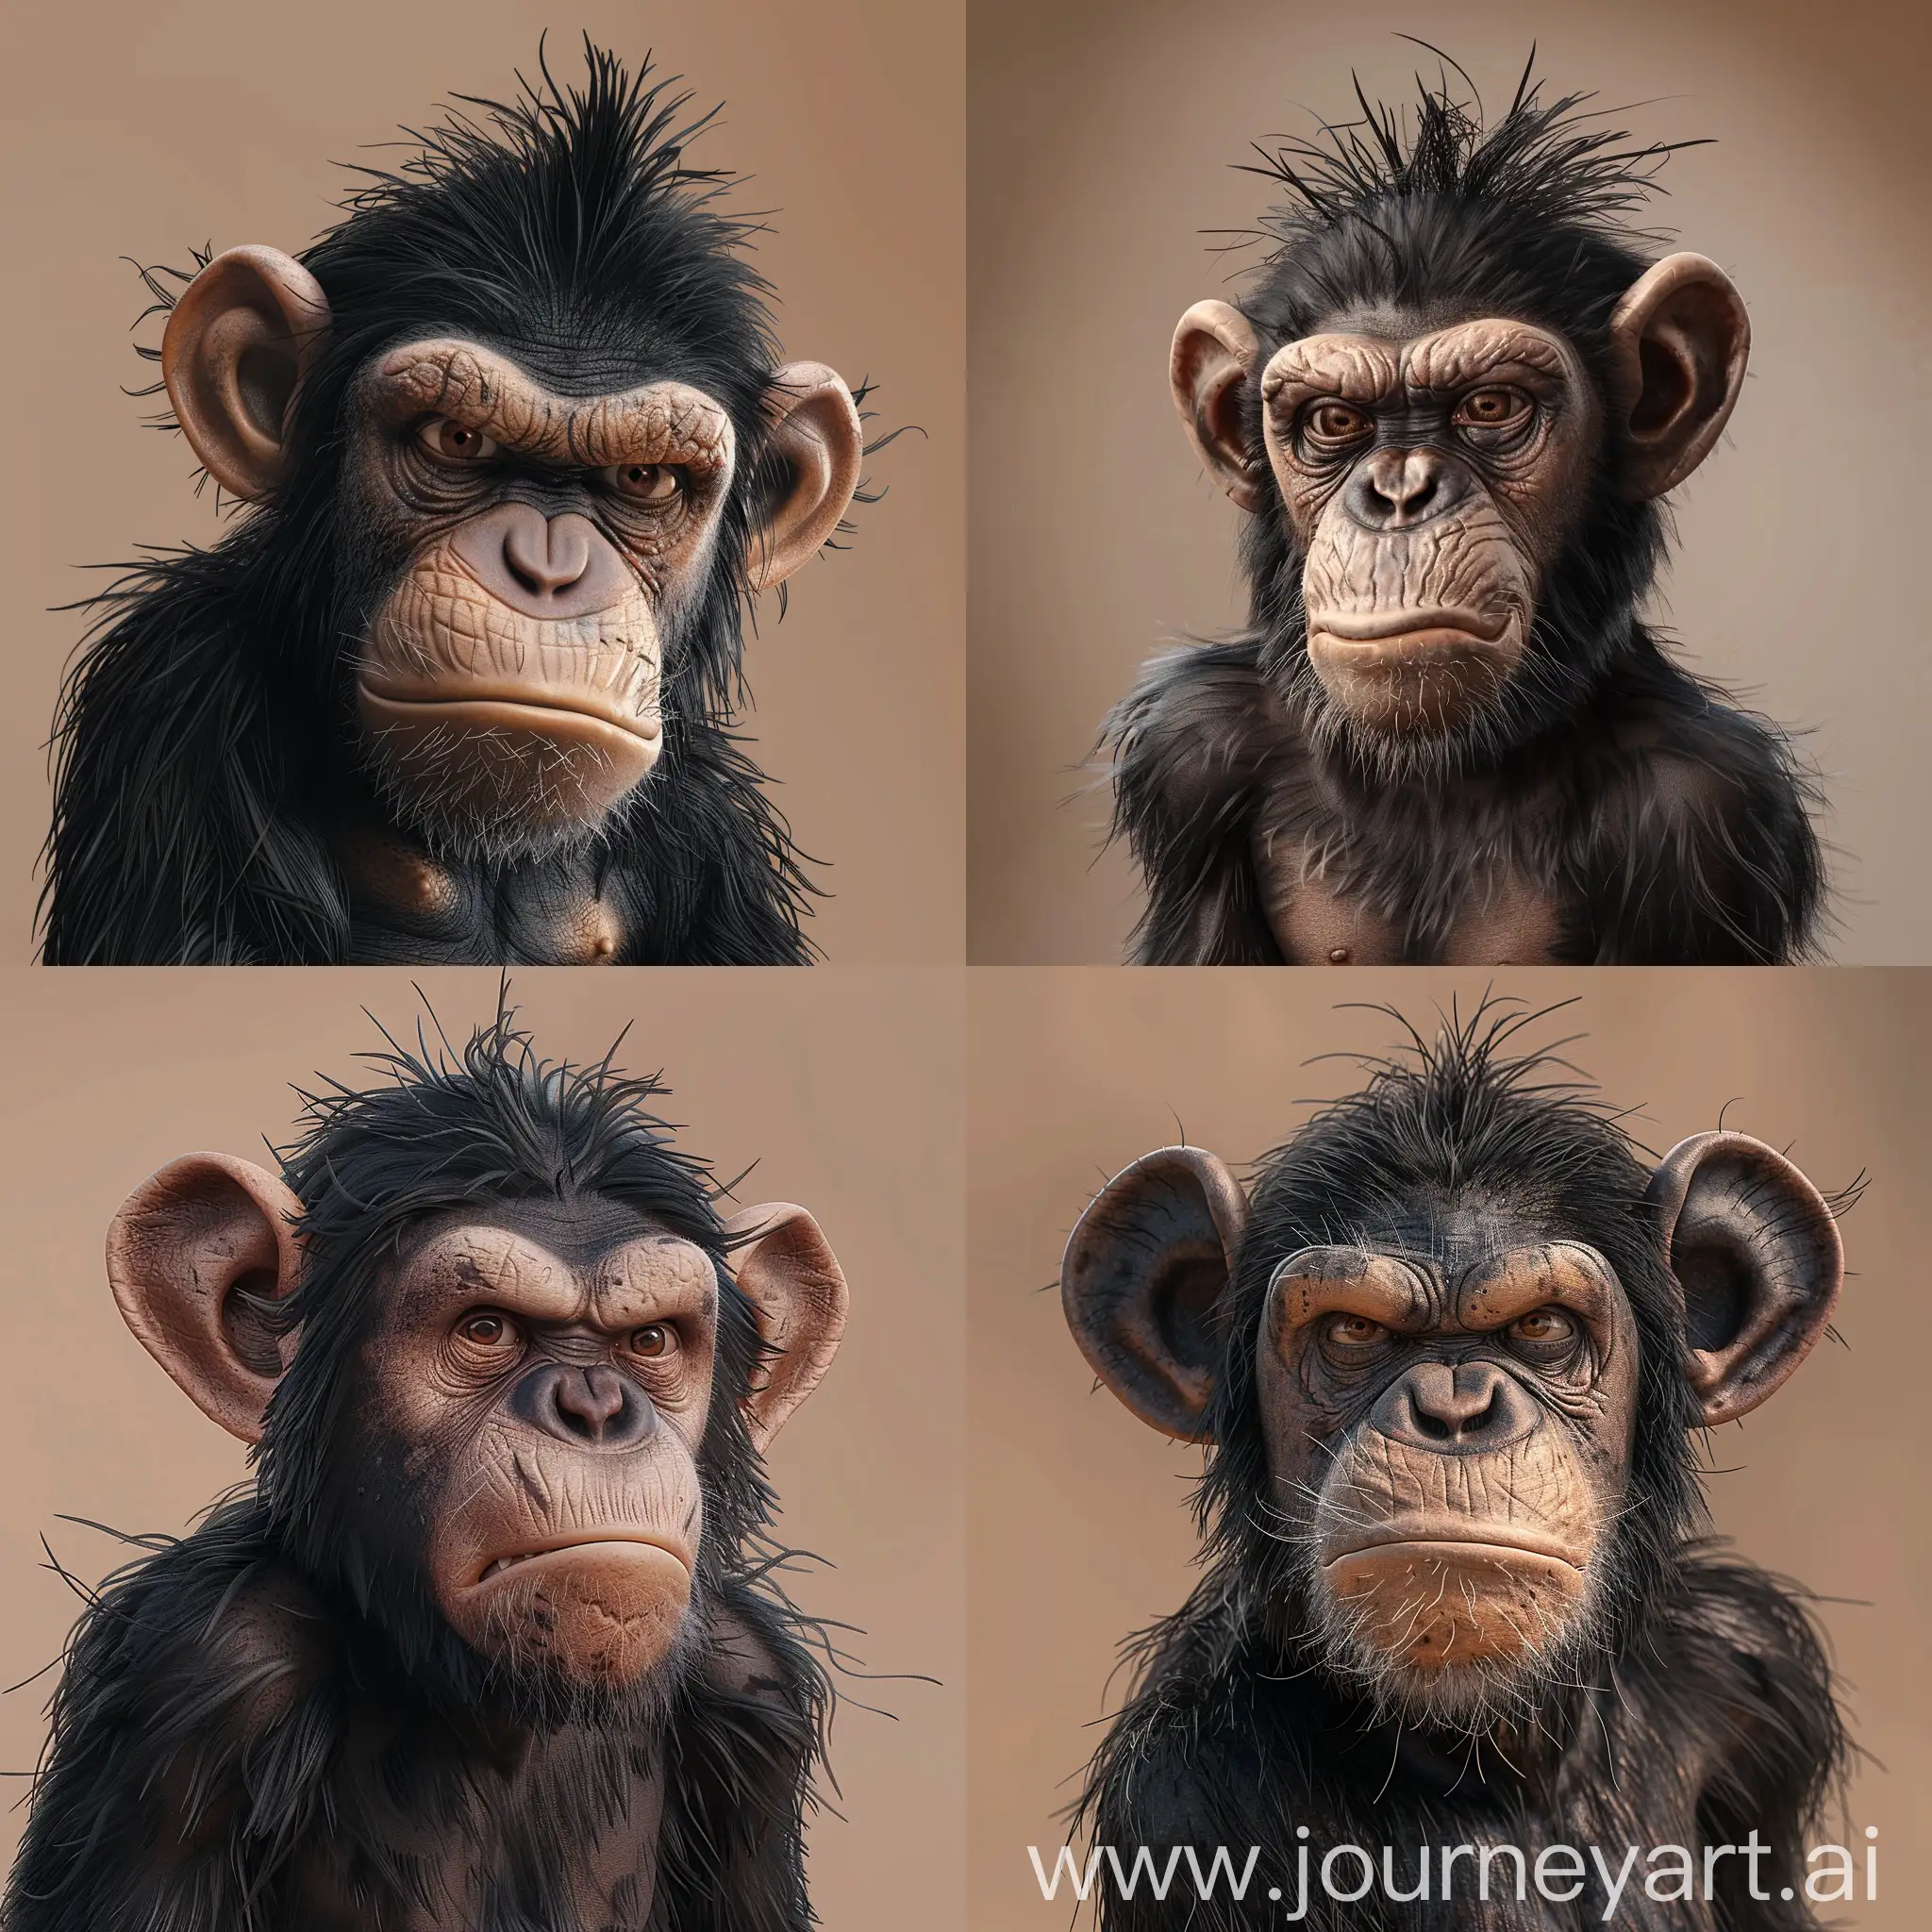 Realistic 3D drawing type image where you see a chimpanzee monkey, the expression of its angry face with the mouth closed twisted to the side, with long spiked black hair and disheveled on the head of the head, , the eyebrows are prominent, the ears are very large, , with large brown eyes the background of the image that is a light brown color